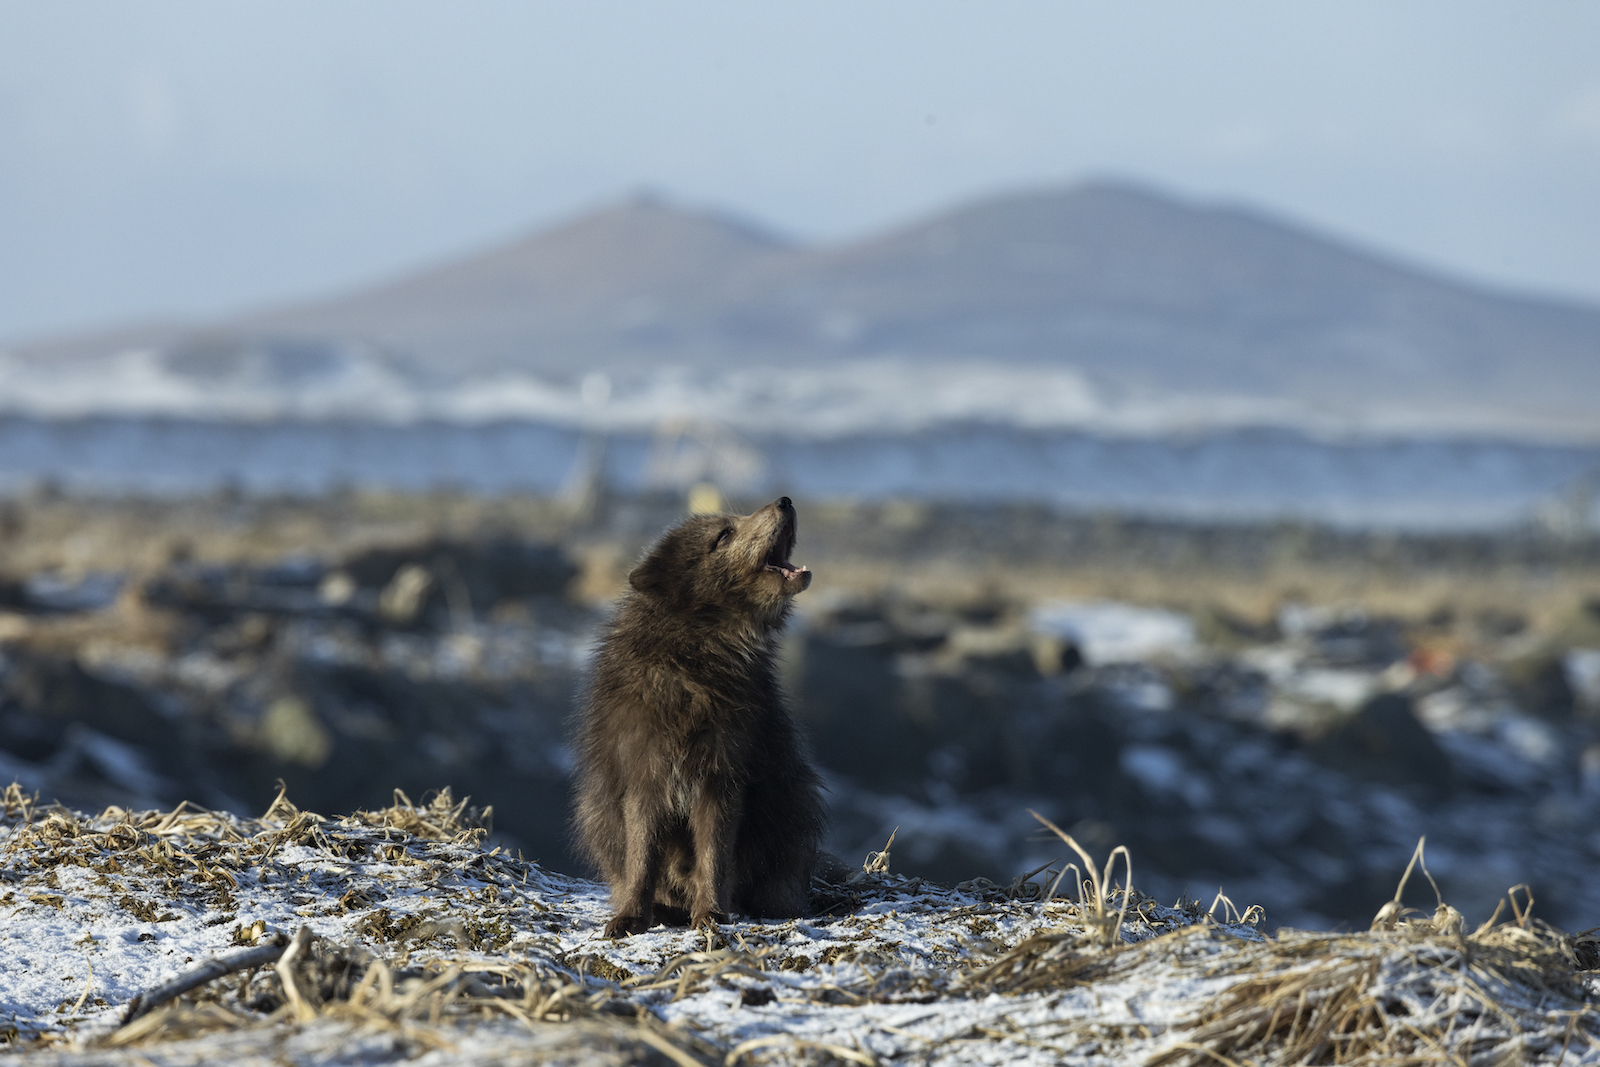 A brown arctic fox pup barks in the center of the frame